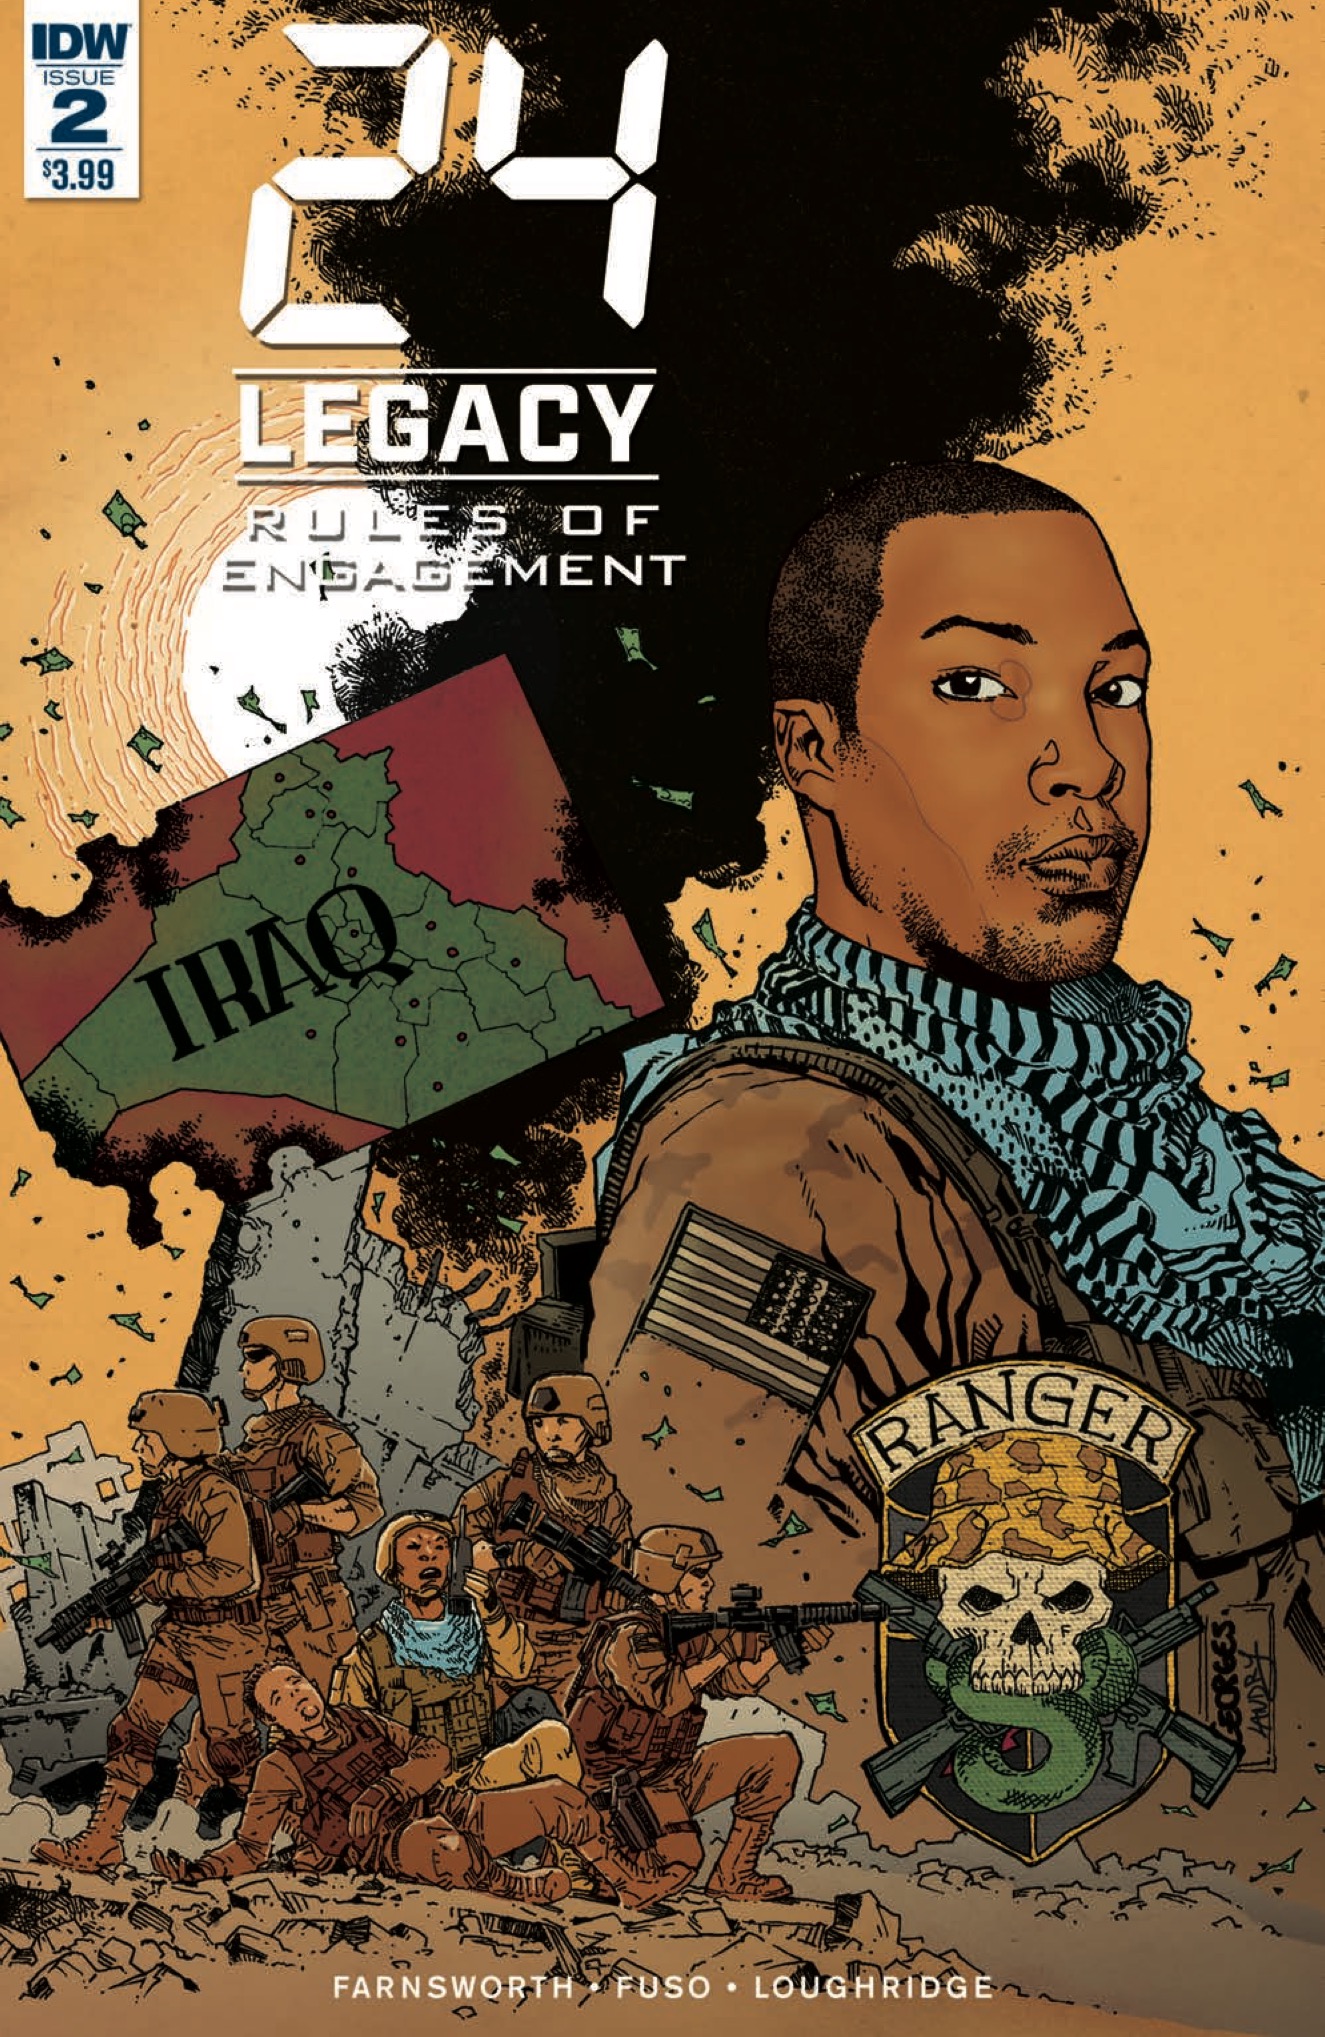 [EXCLUSIVE] IDW Preview: 24: Legacy—Rules of Engagement #2